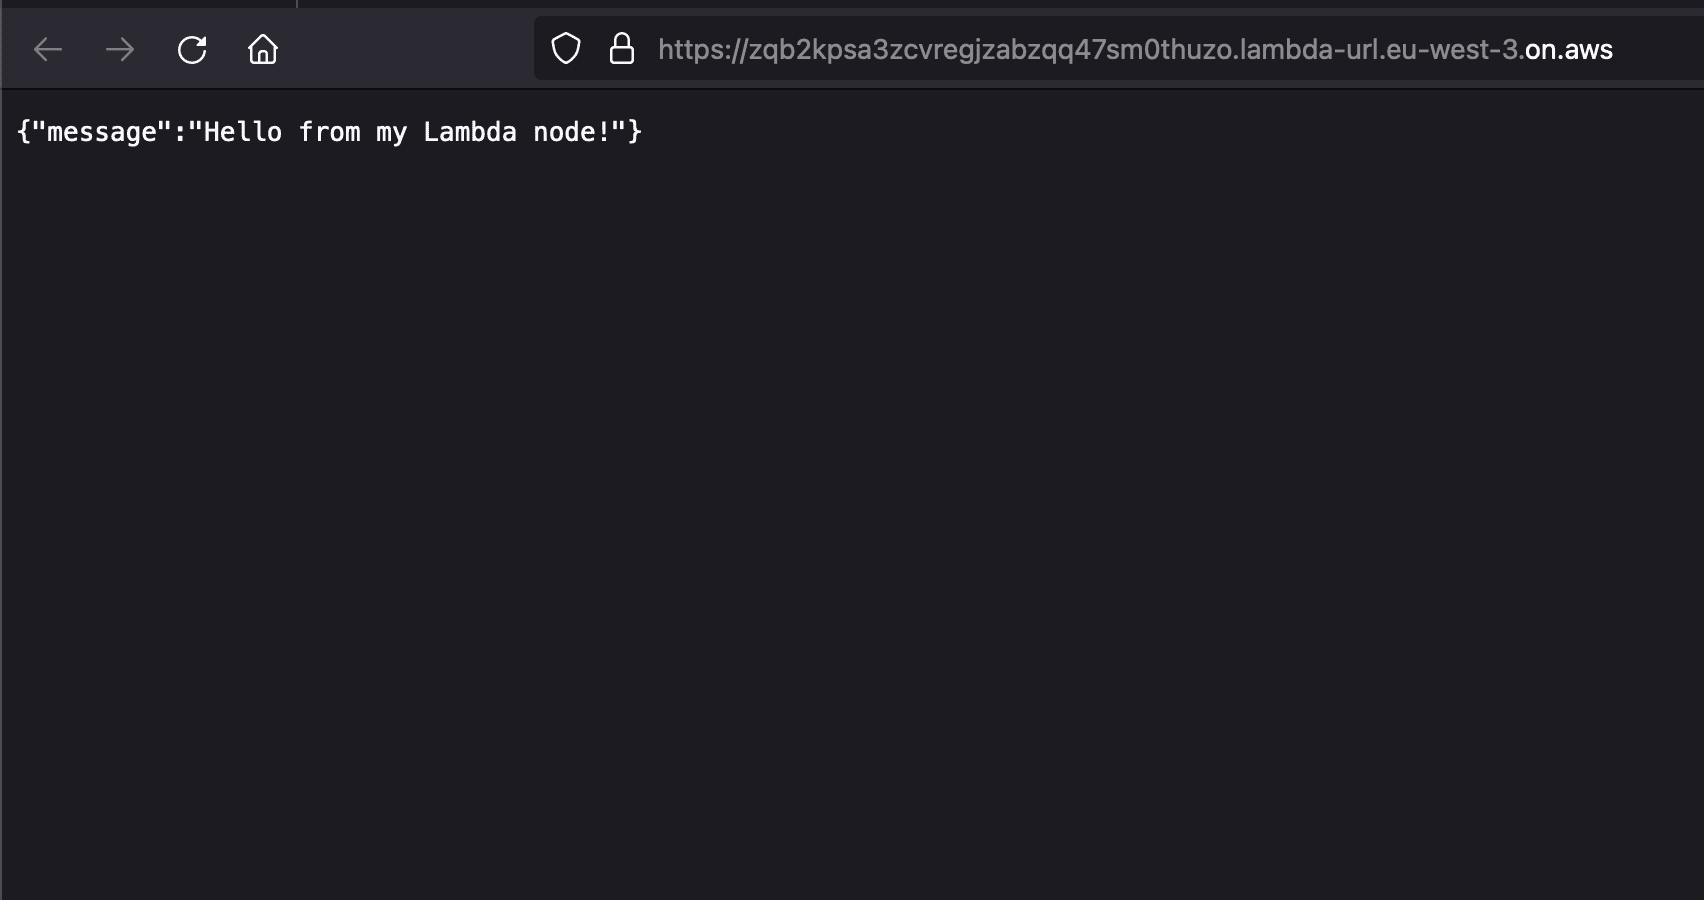 Calling the Lambda Function URL in the browser.